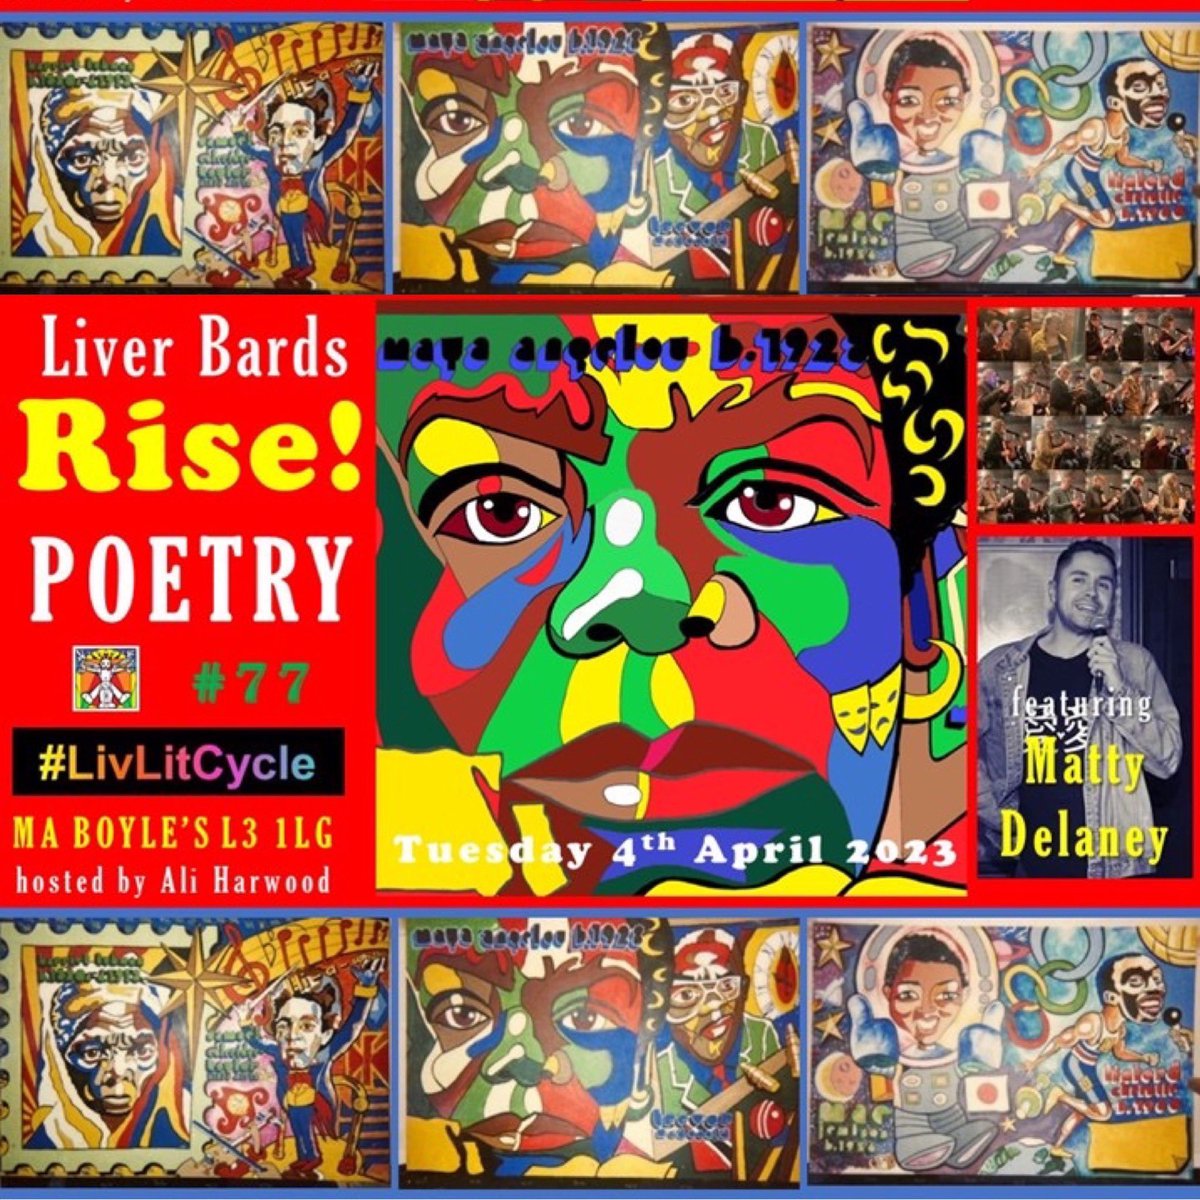 On #WorldPoetryDay, here’s a look back to our 3 previous Liver Bards events this year and a look forward to our next one - ‘Rise!’ featuring Matty Delaney. First Tuesday of every month. See you in a week. Ali #livlitcycle #liverpoolspeaks